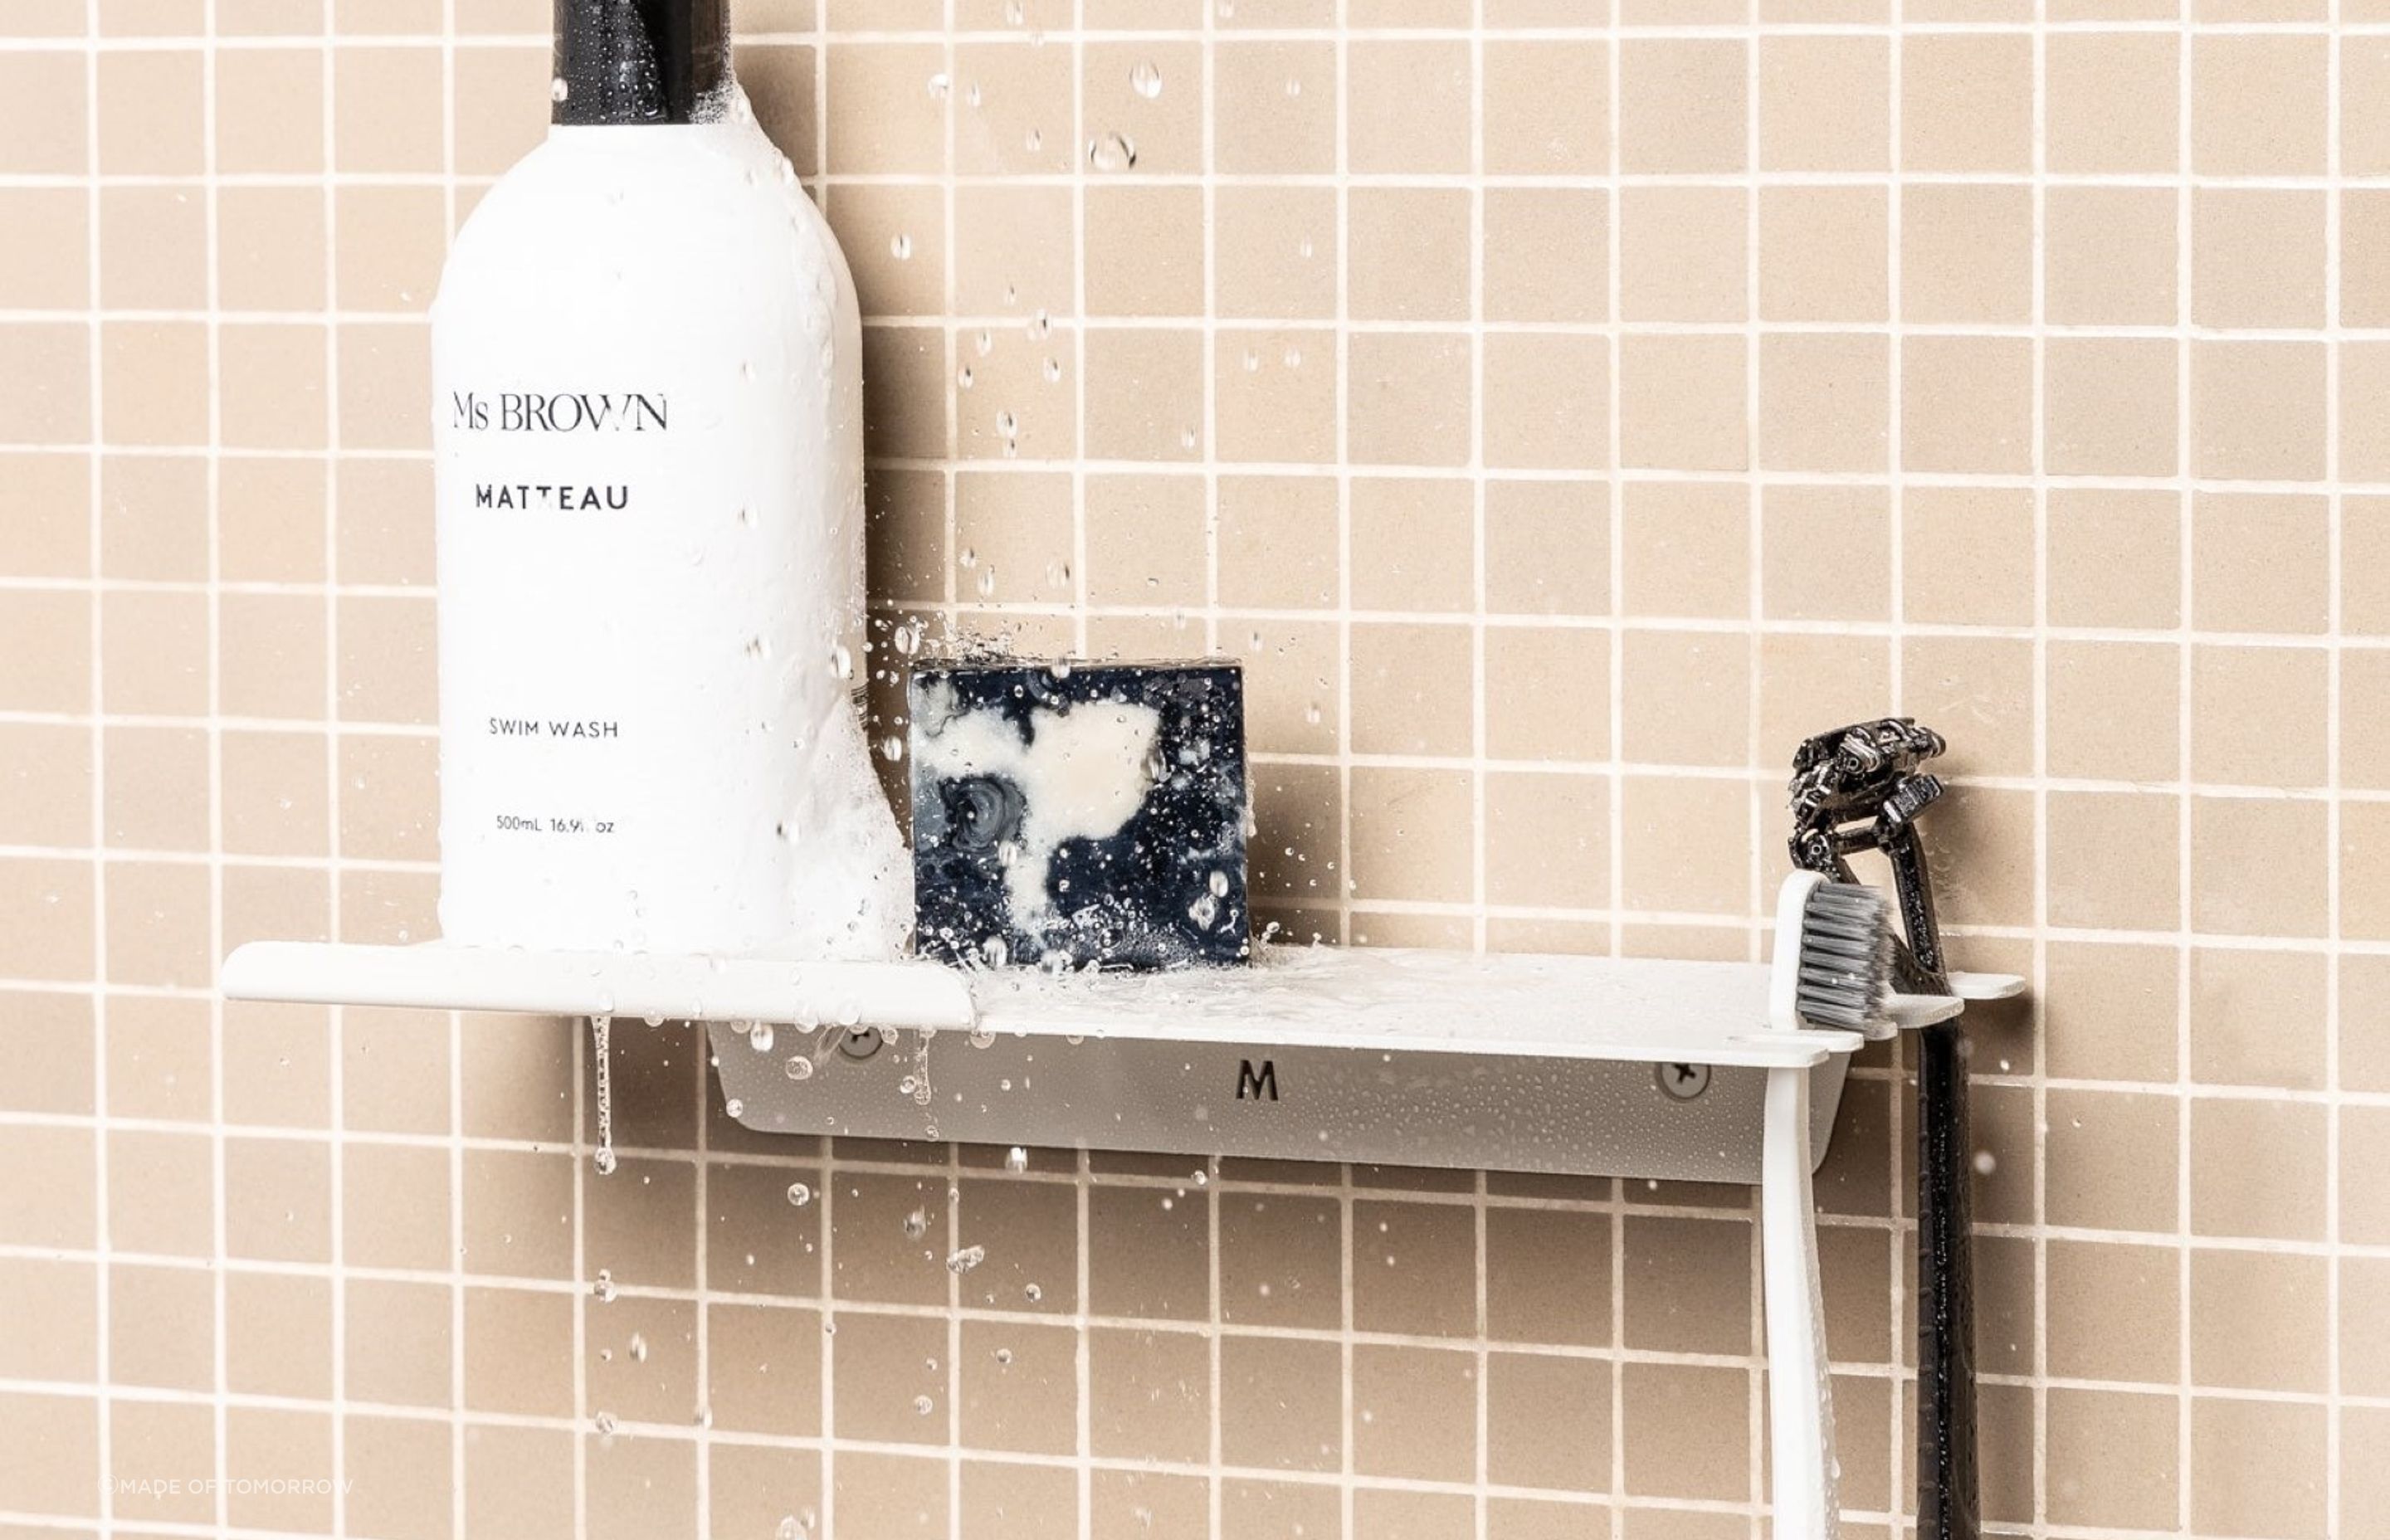 The versatile Fold Shower Shelf is a stylish and convenient addition to any shower space.